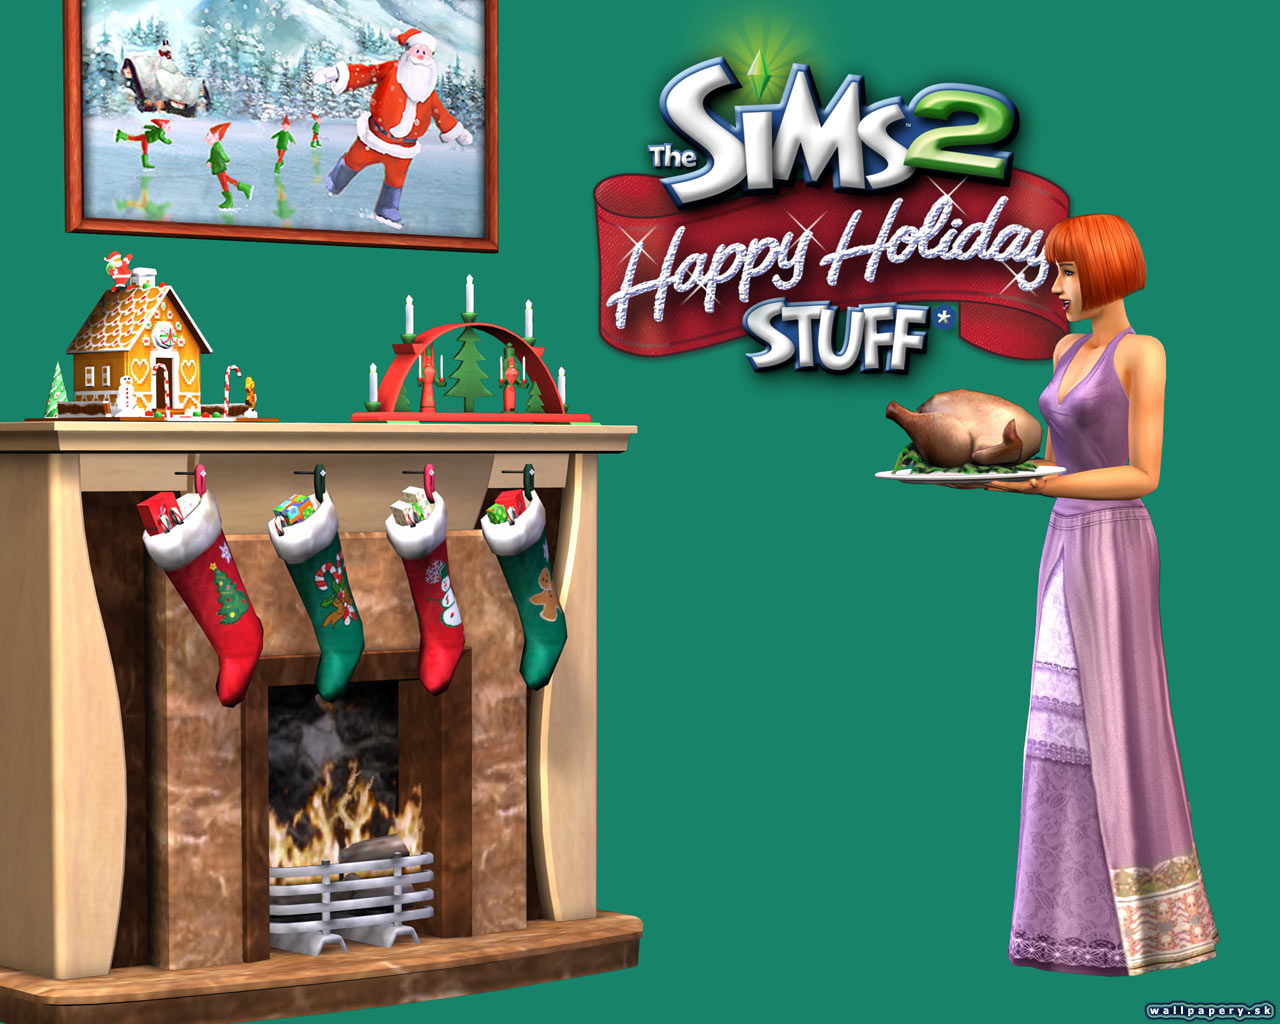 The Sims 2: Happy Holiday Stuff - wallpaper 8